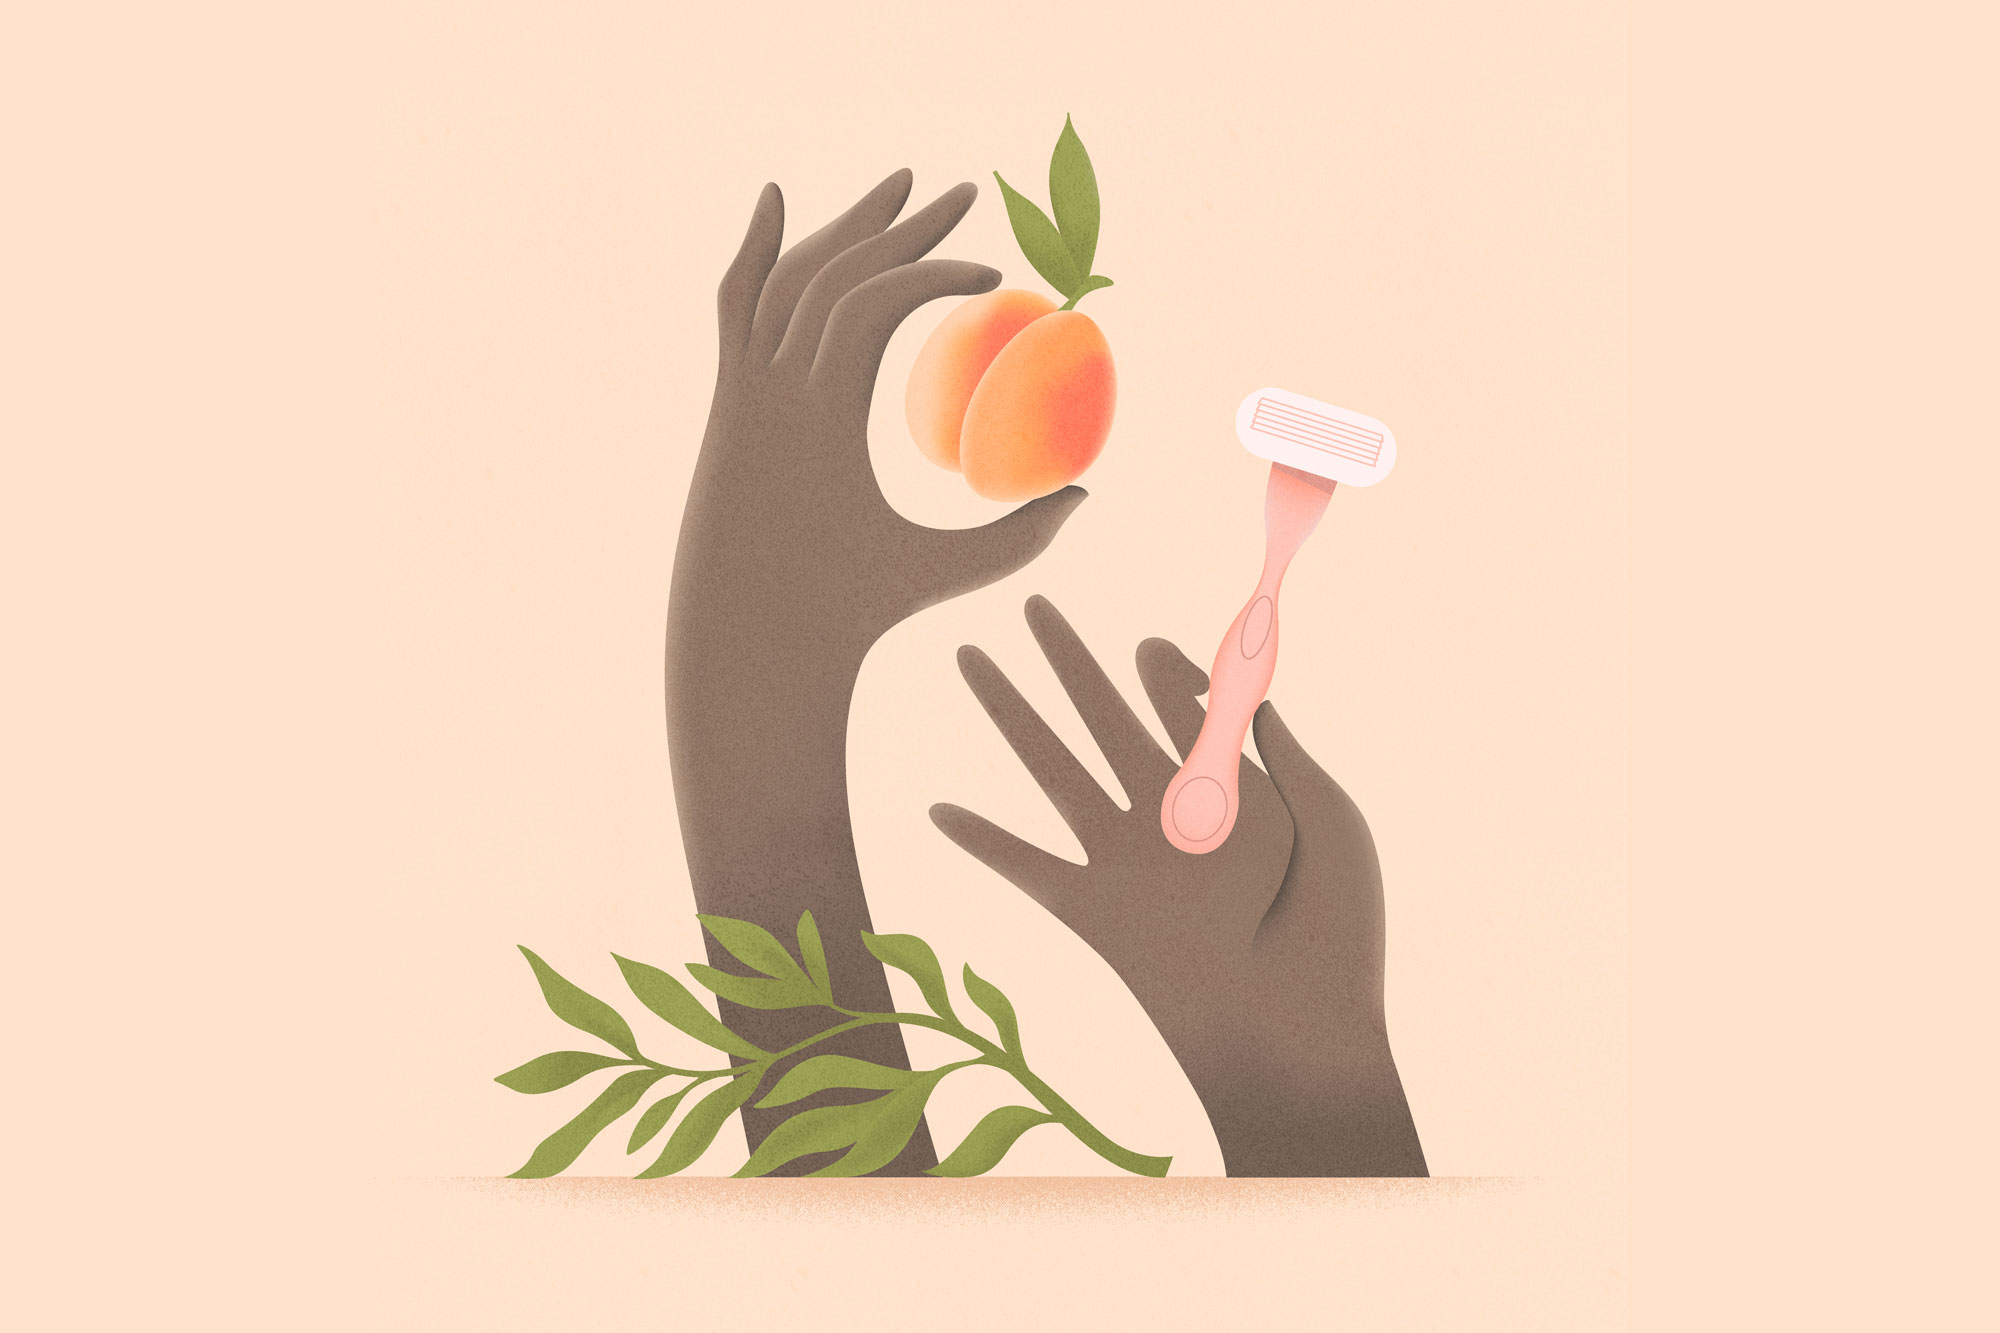 Illustration of Hands With A Razor Shaving A Peach